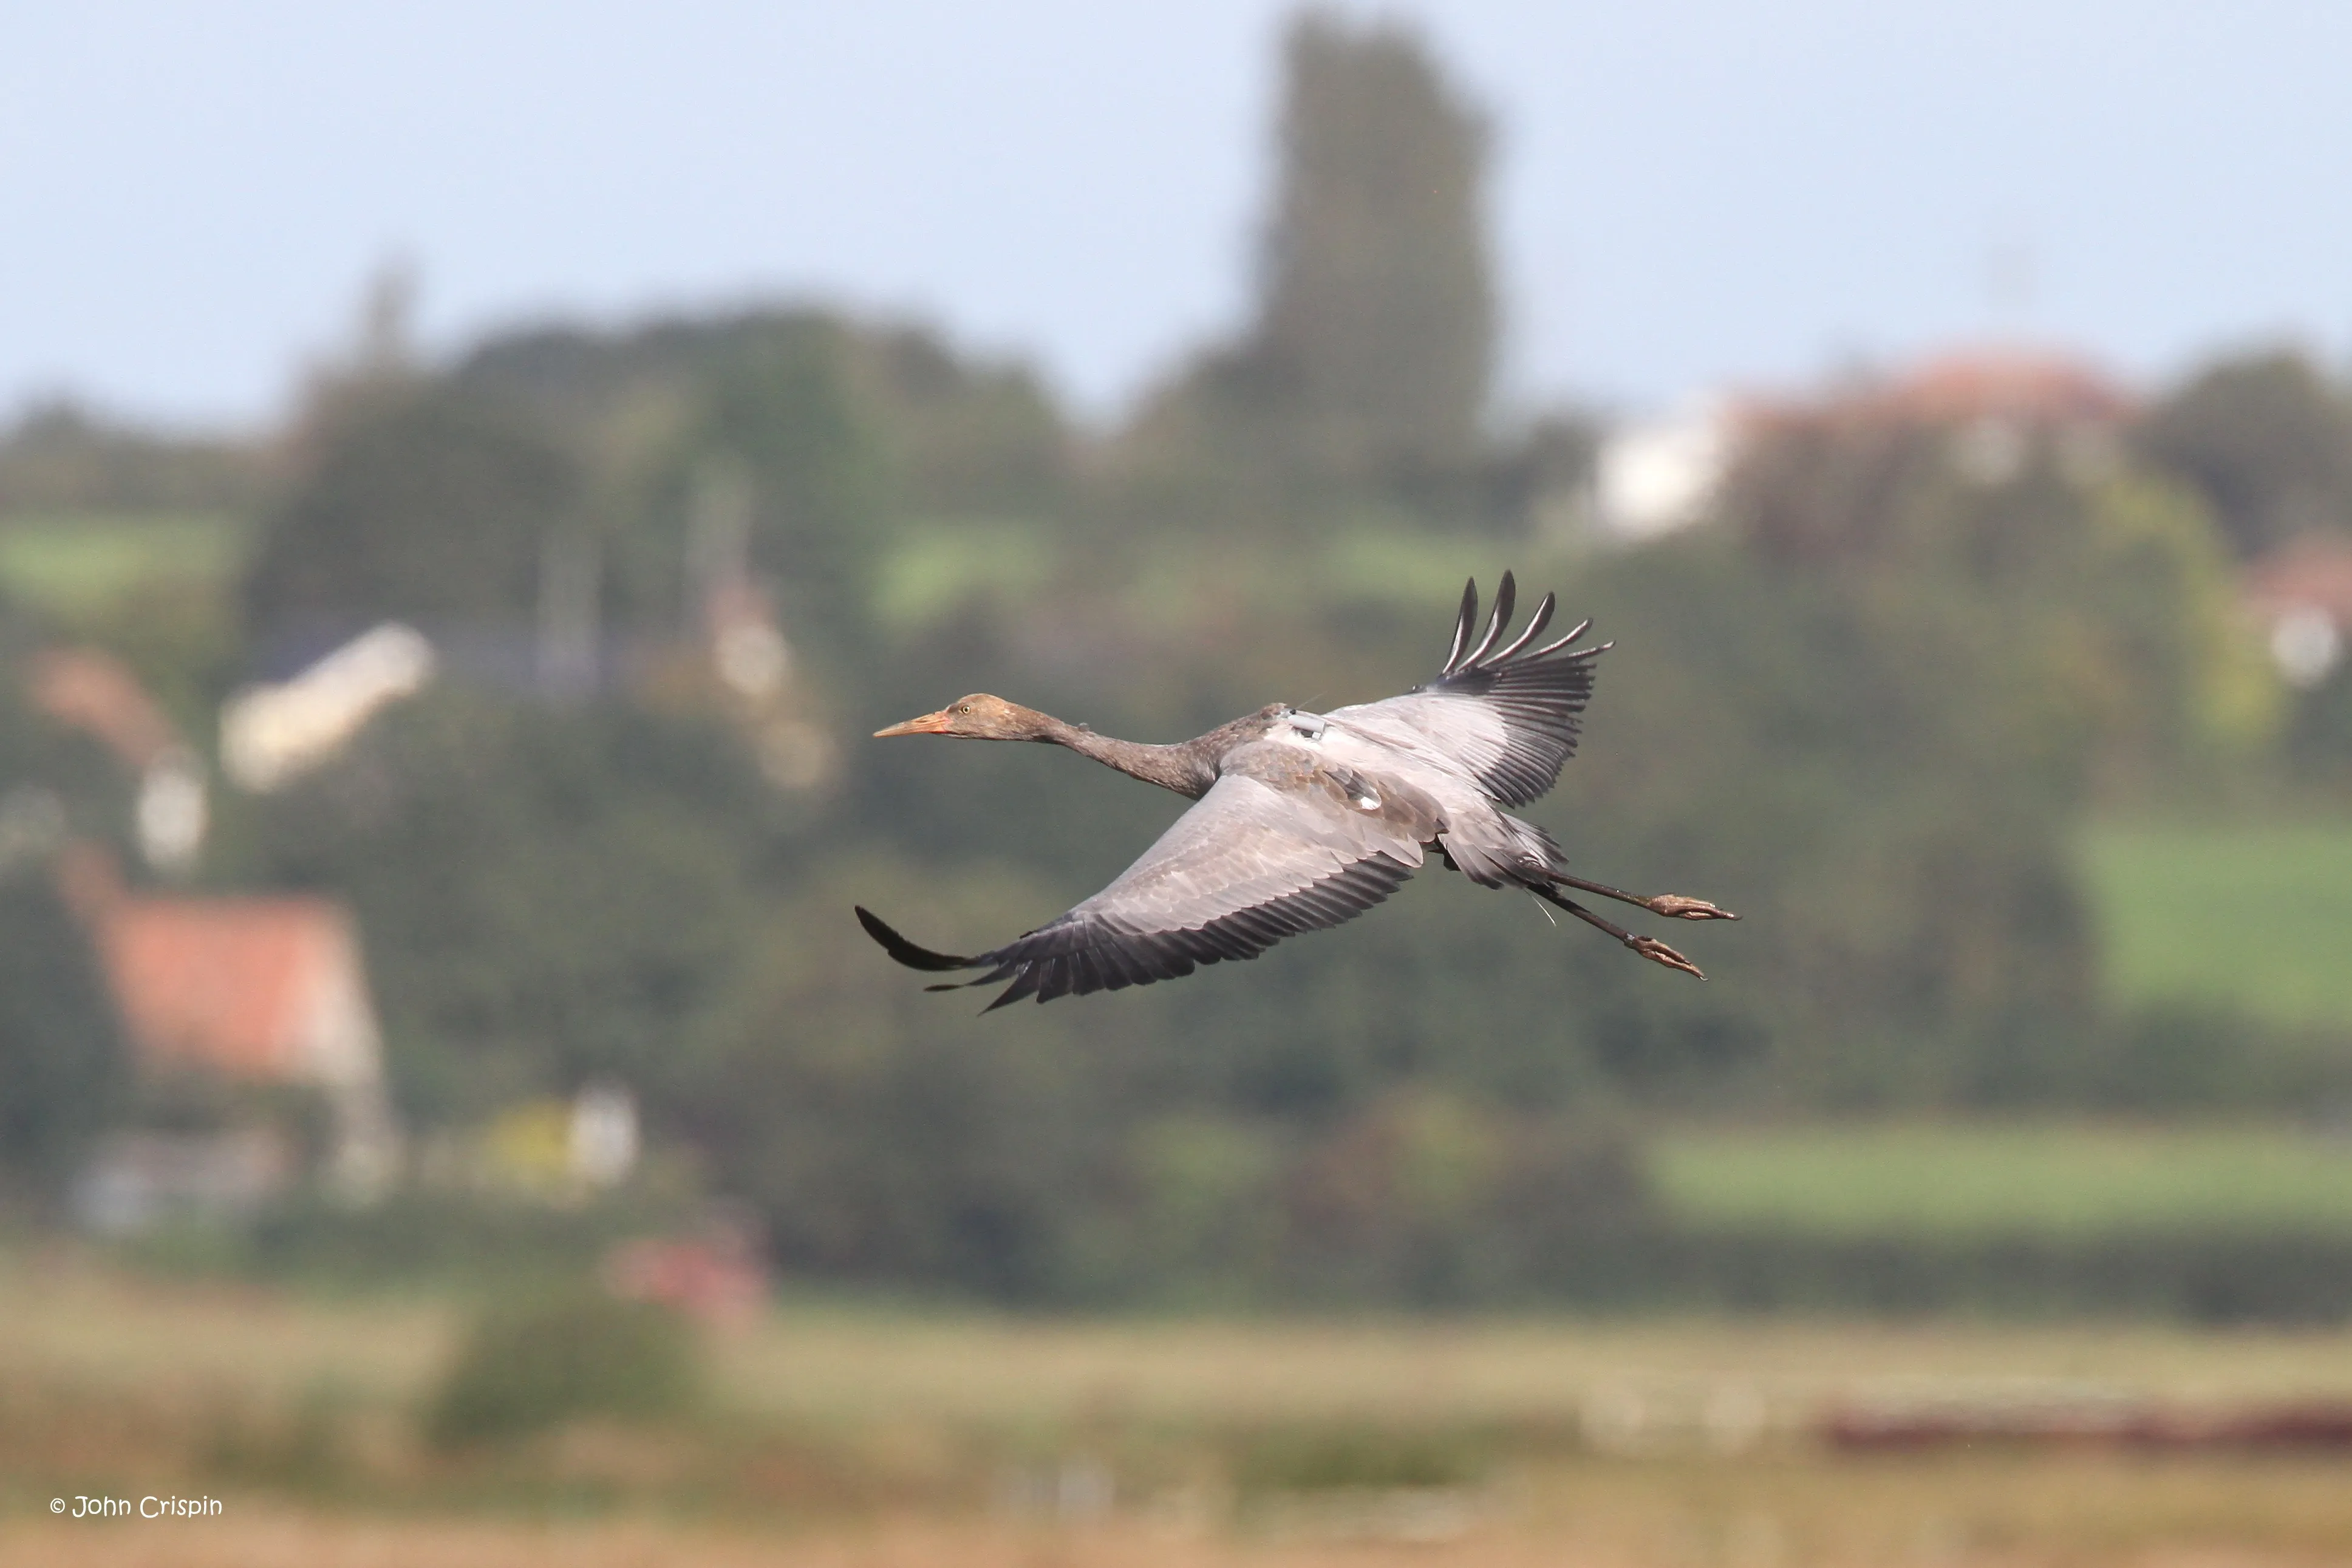 A young Crane taking flight against countryside backdrop. 